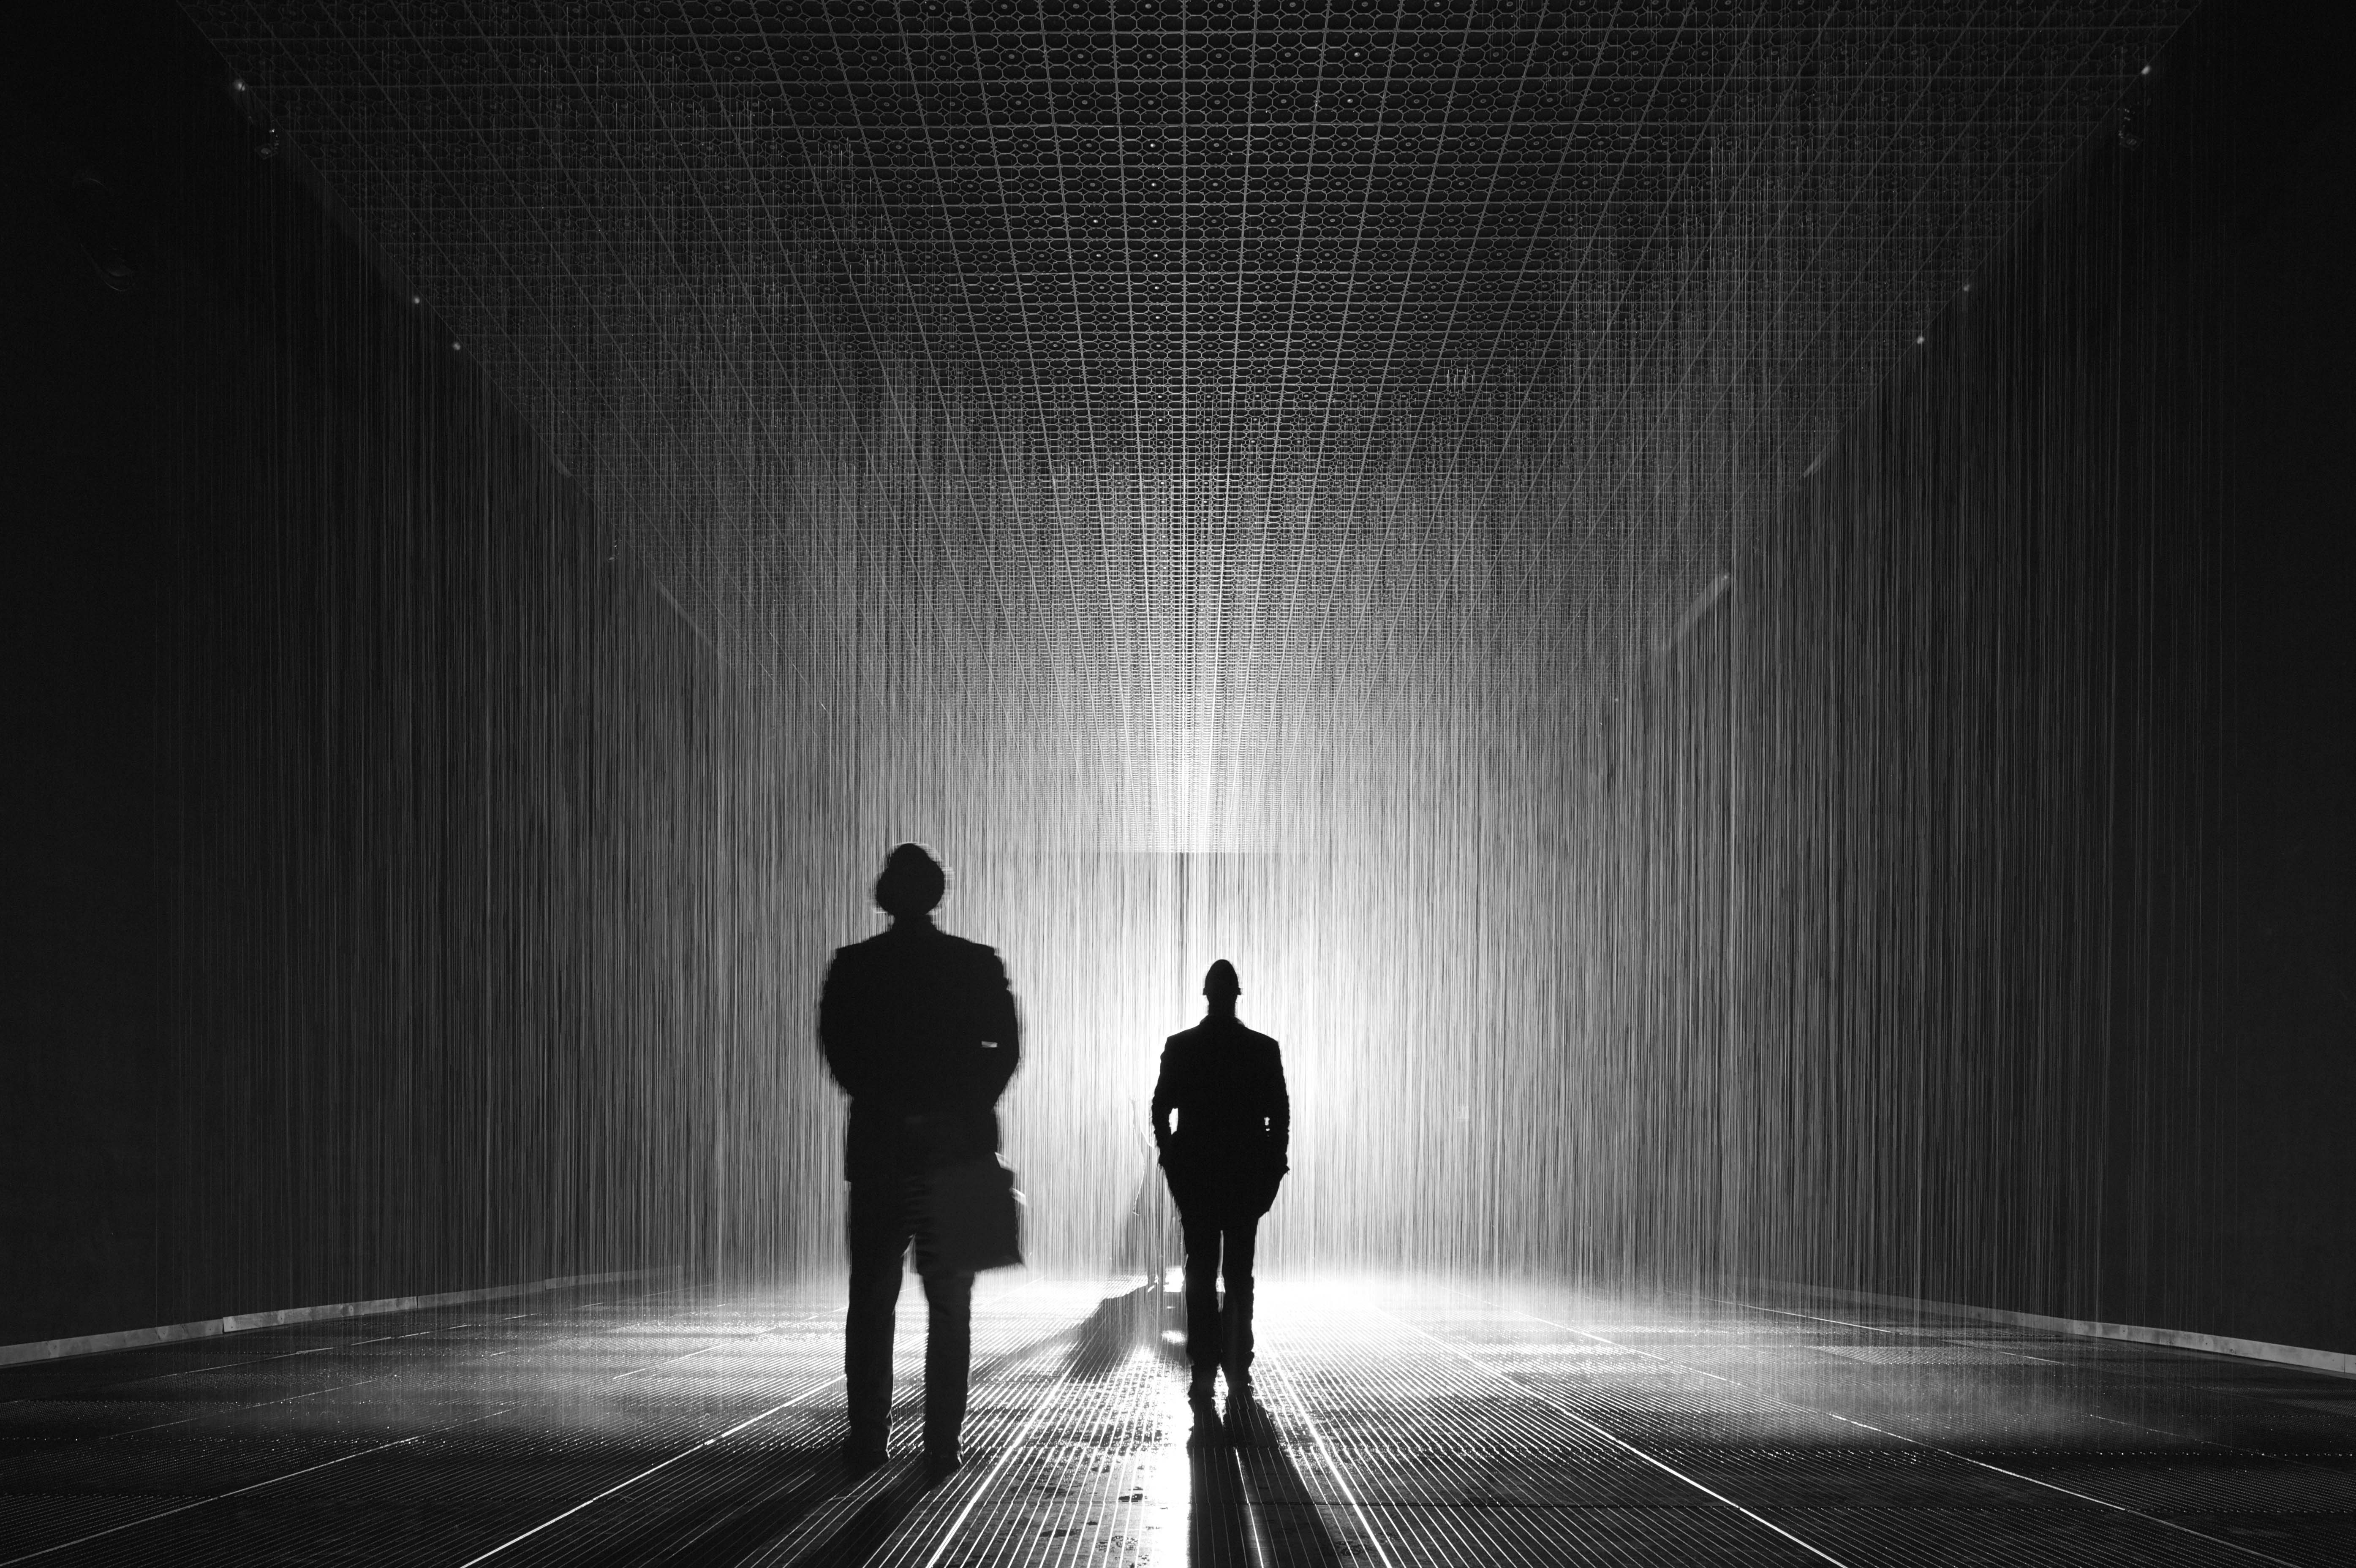 The “Rain Room” at The Los Angeles County Museum of Art (LACMA), on view November 1, 2015–March 6, 2016, an immersive work by the London-based artist collective Random International. Within this large-scale installation, water falls continuously to create a cacophonous interior downpour that pauses wherever a human body is detected.